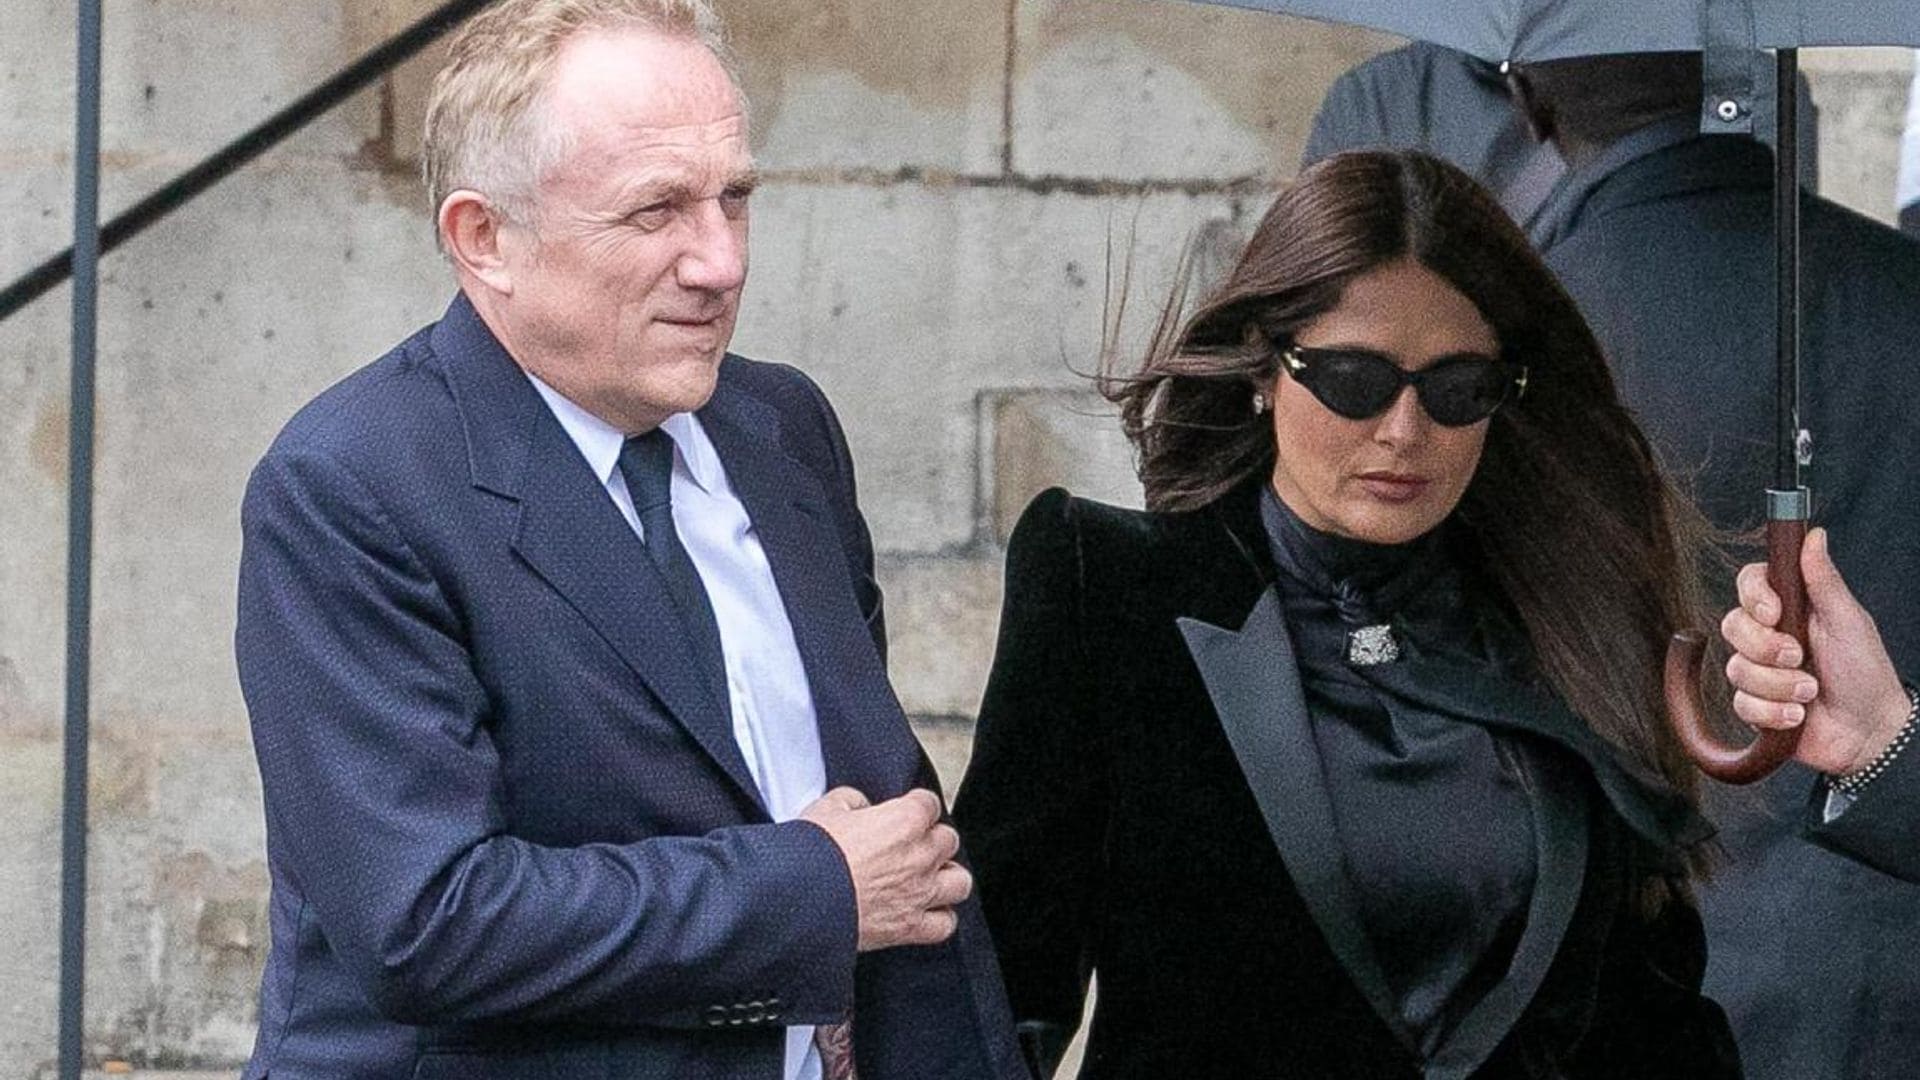 Salma Hayek and more stars attend emotional funeral for Peter Lindbergh